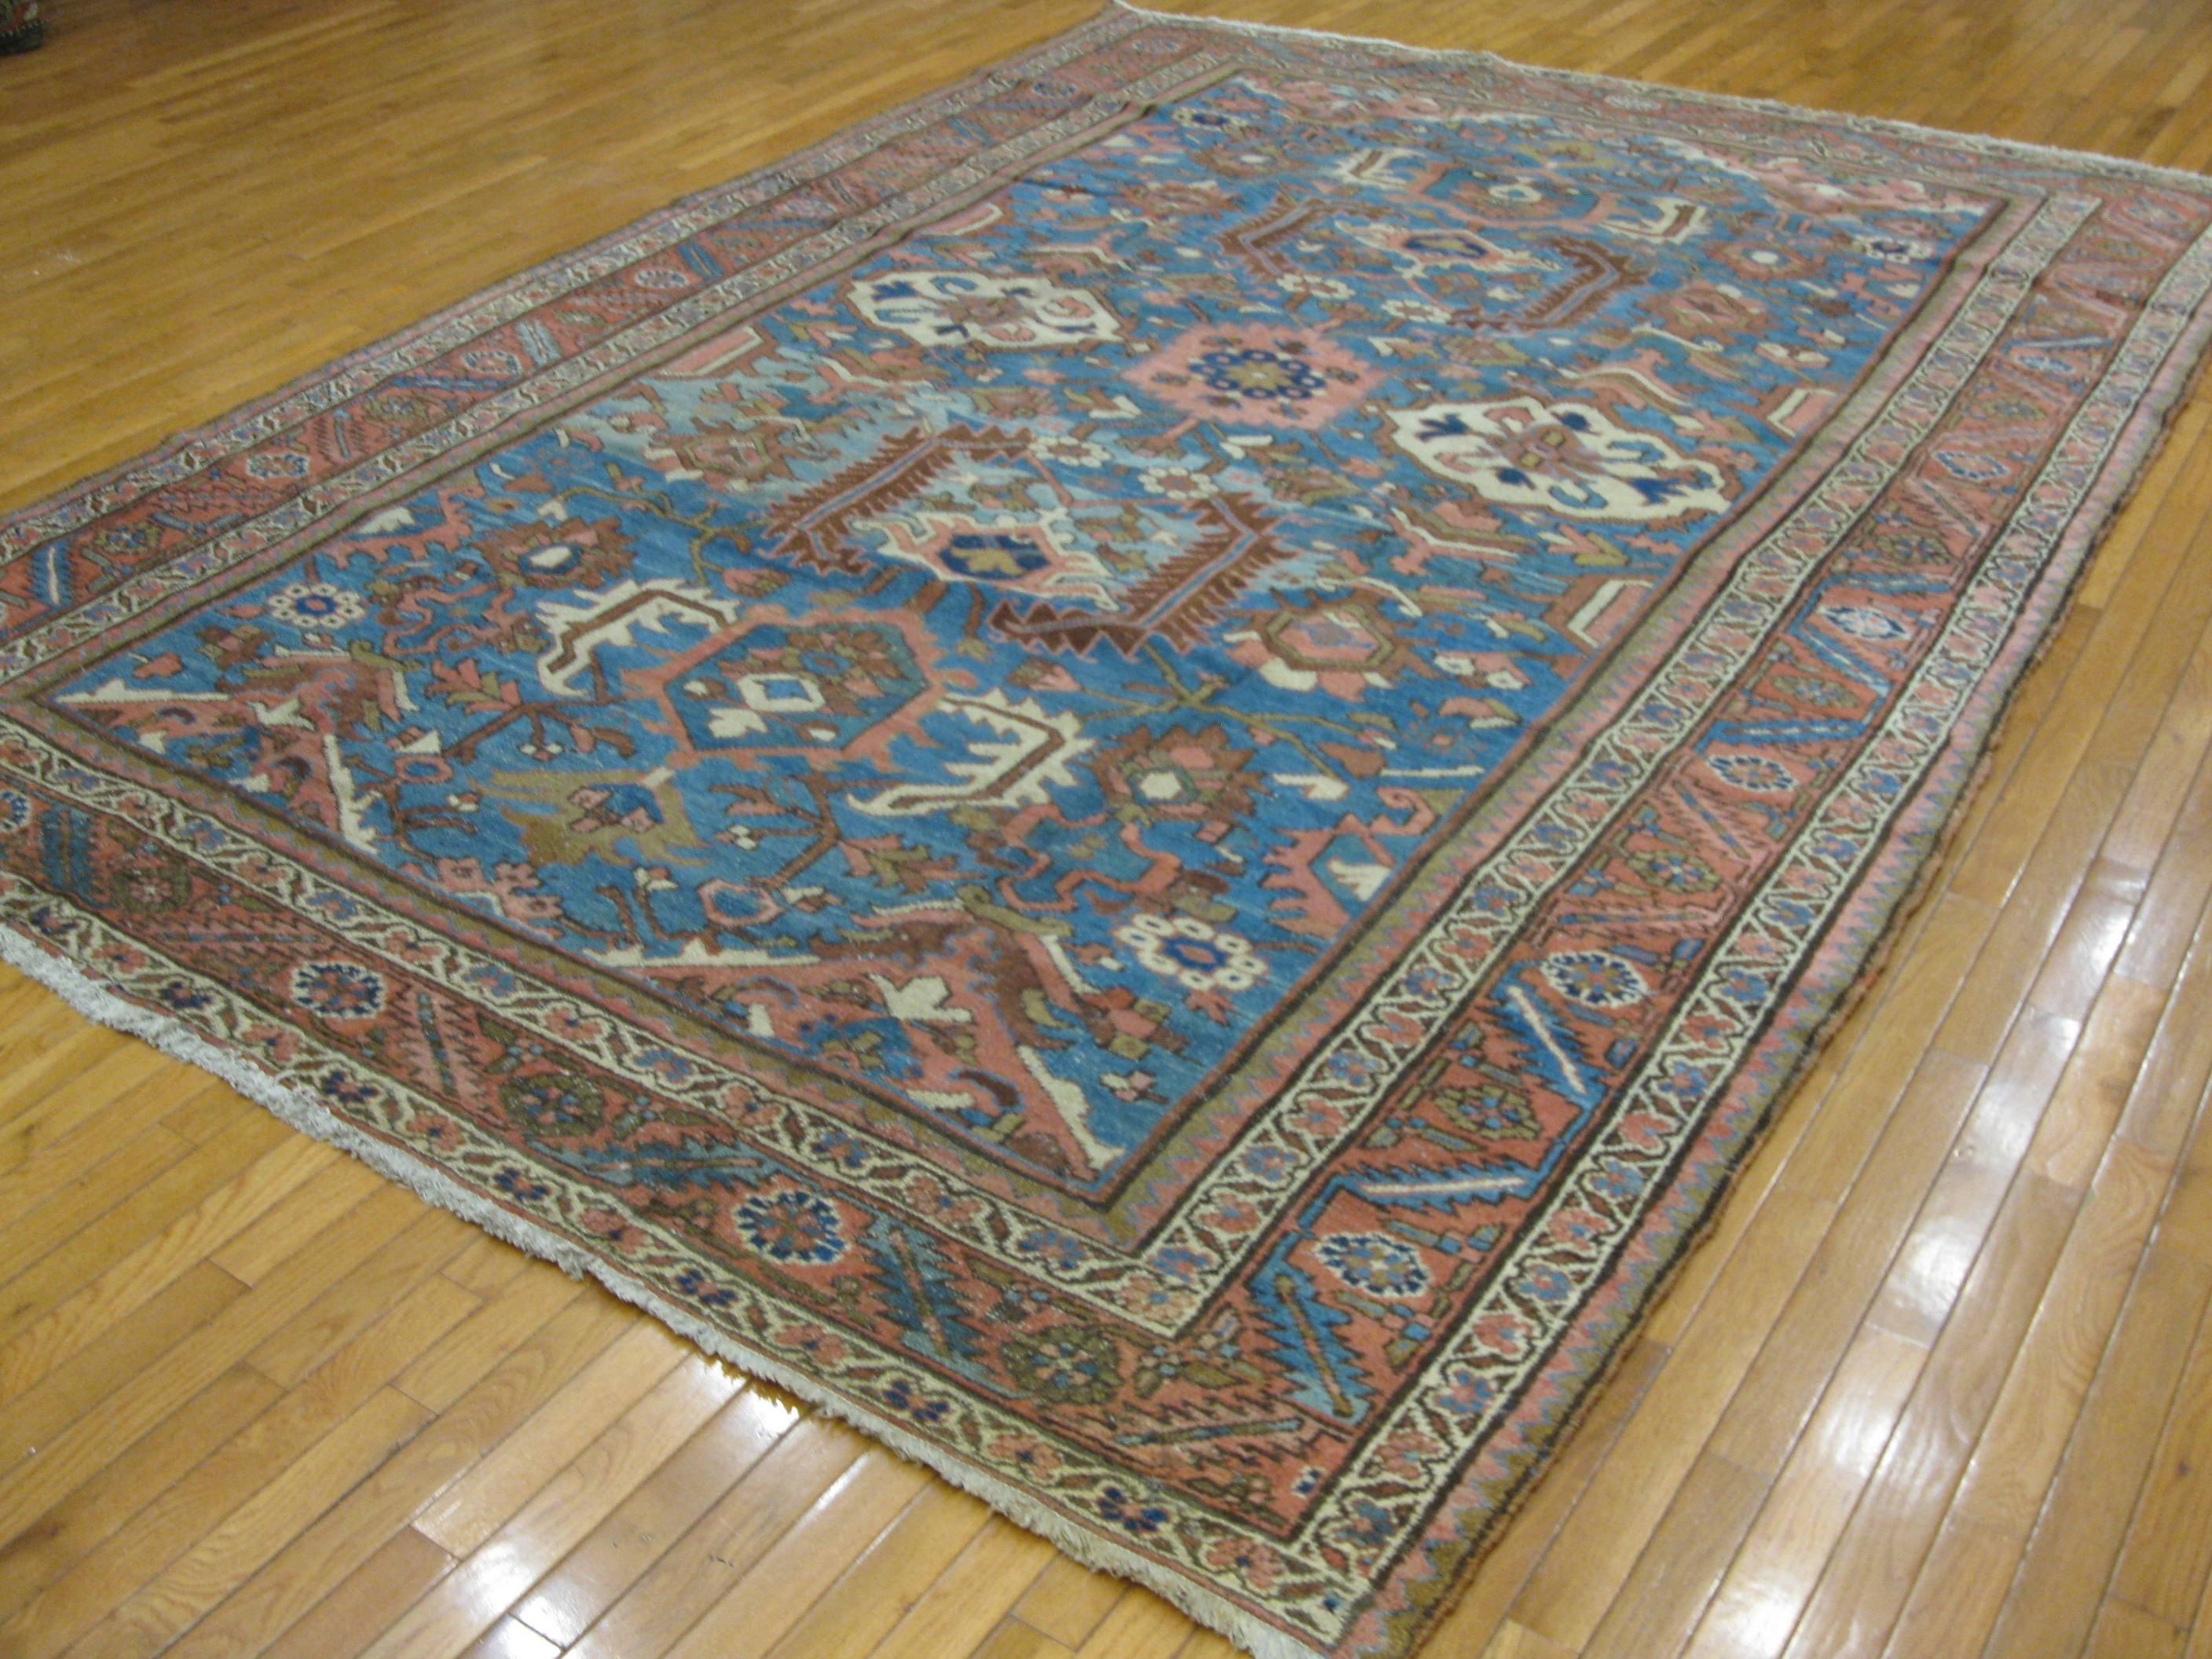 Antique Room Size Hand-Knotted Blue Wool Persian Serapi Rug 1